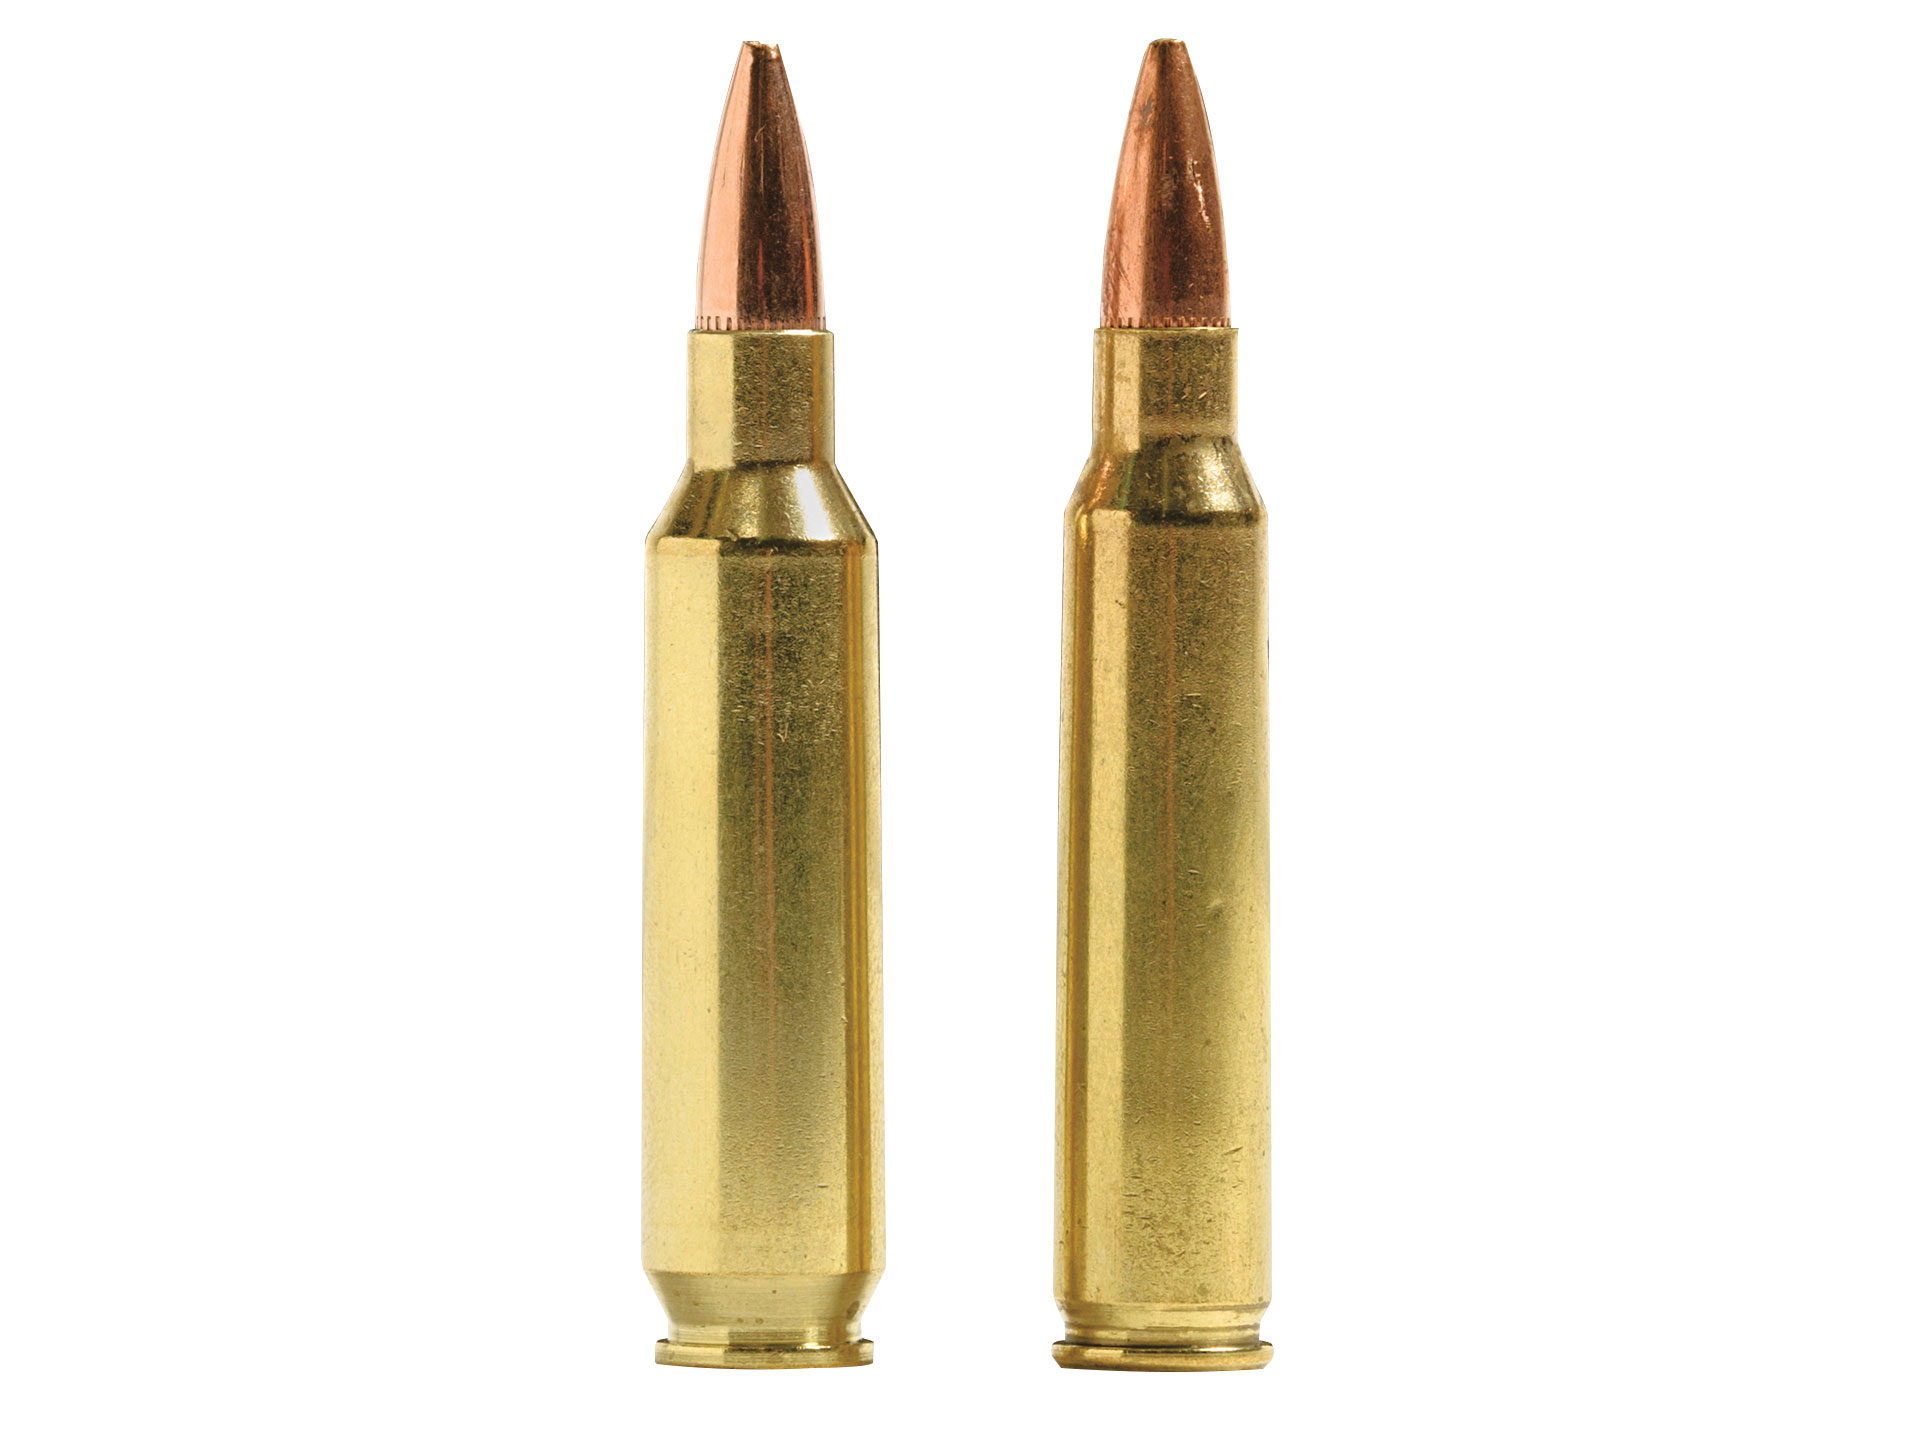 22 Nosler: New Round Has Potential For Varmints, Competition, and Even Big  Game